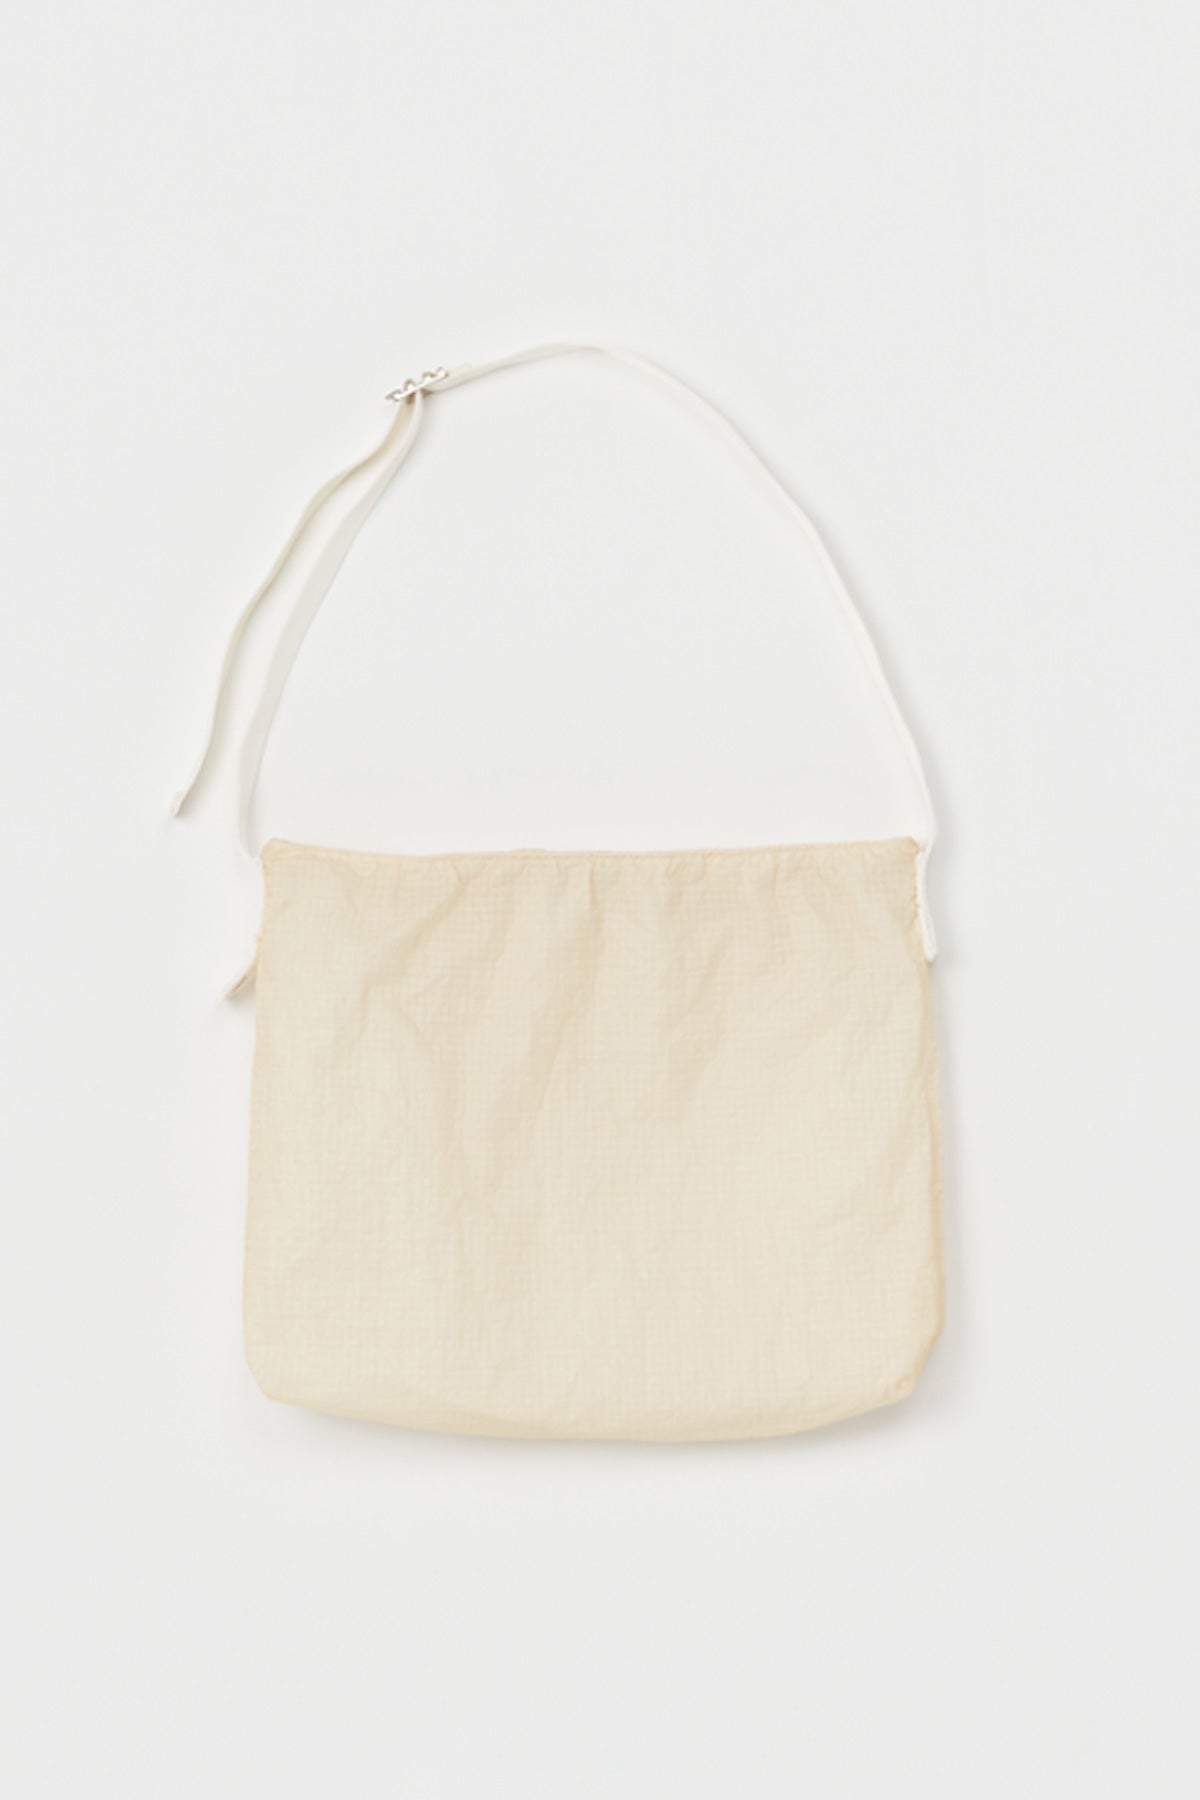 Over Dyed Cross Body Bag - Ivory